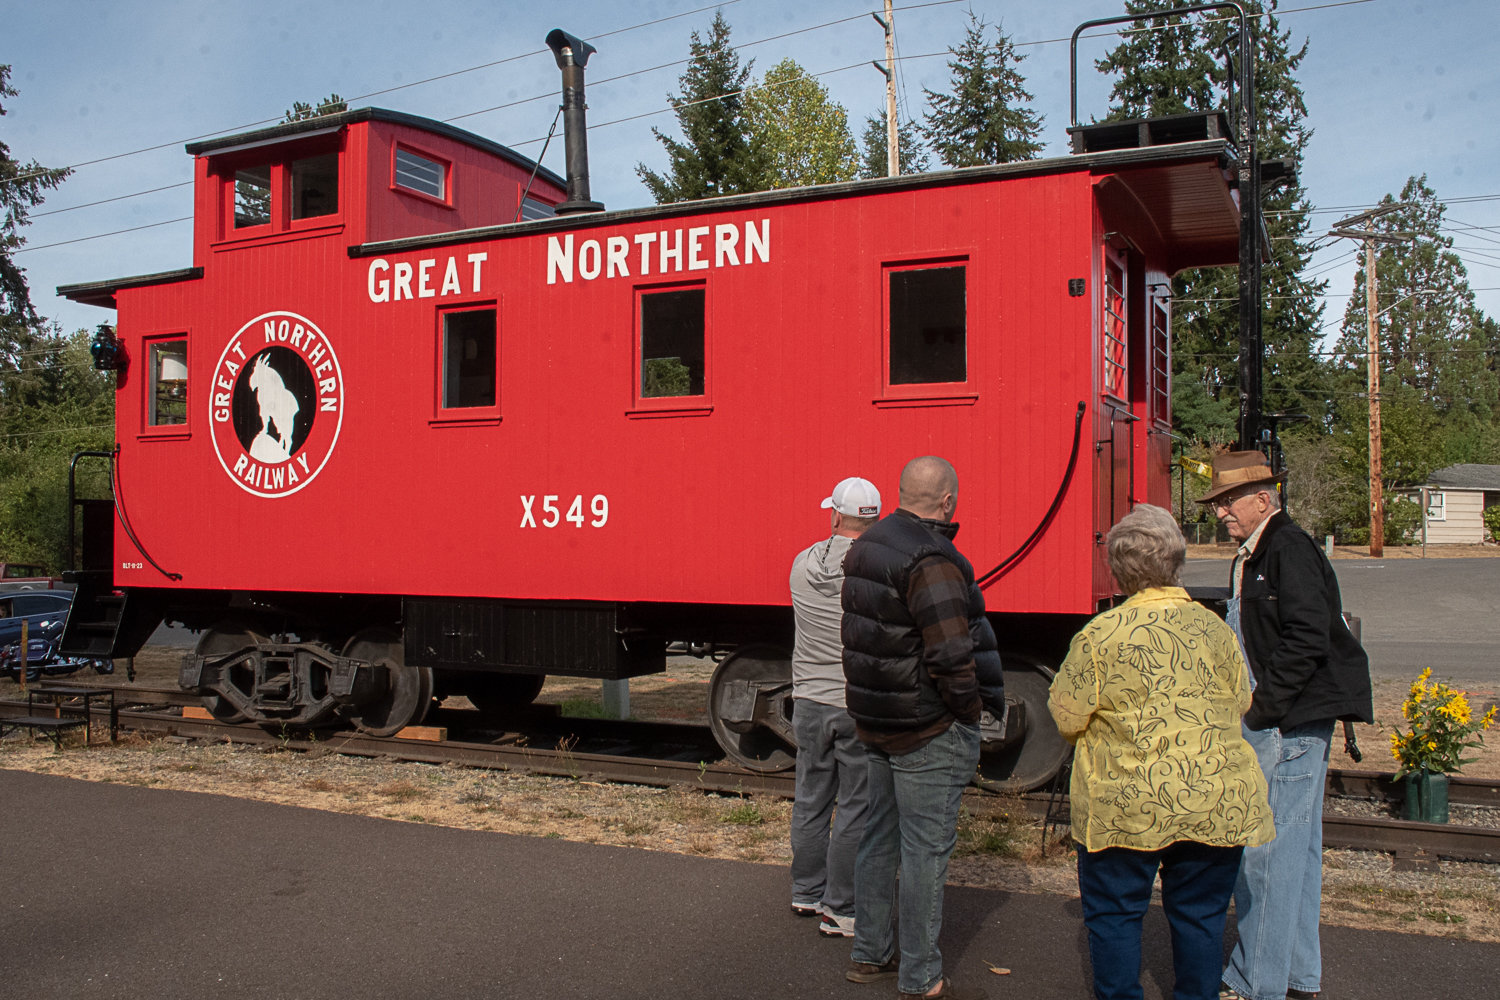 From left to right, Tenino City Council member Jason Lawton, Tenino Mayor Wayne Fournier, Tenino City Council member Linda Gotovac talk to Jan Wigley, of Centralia, a retired metal worker who did the fabrication and welding necessary to restore the caboose.